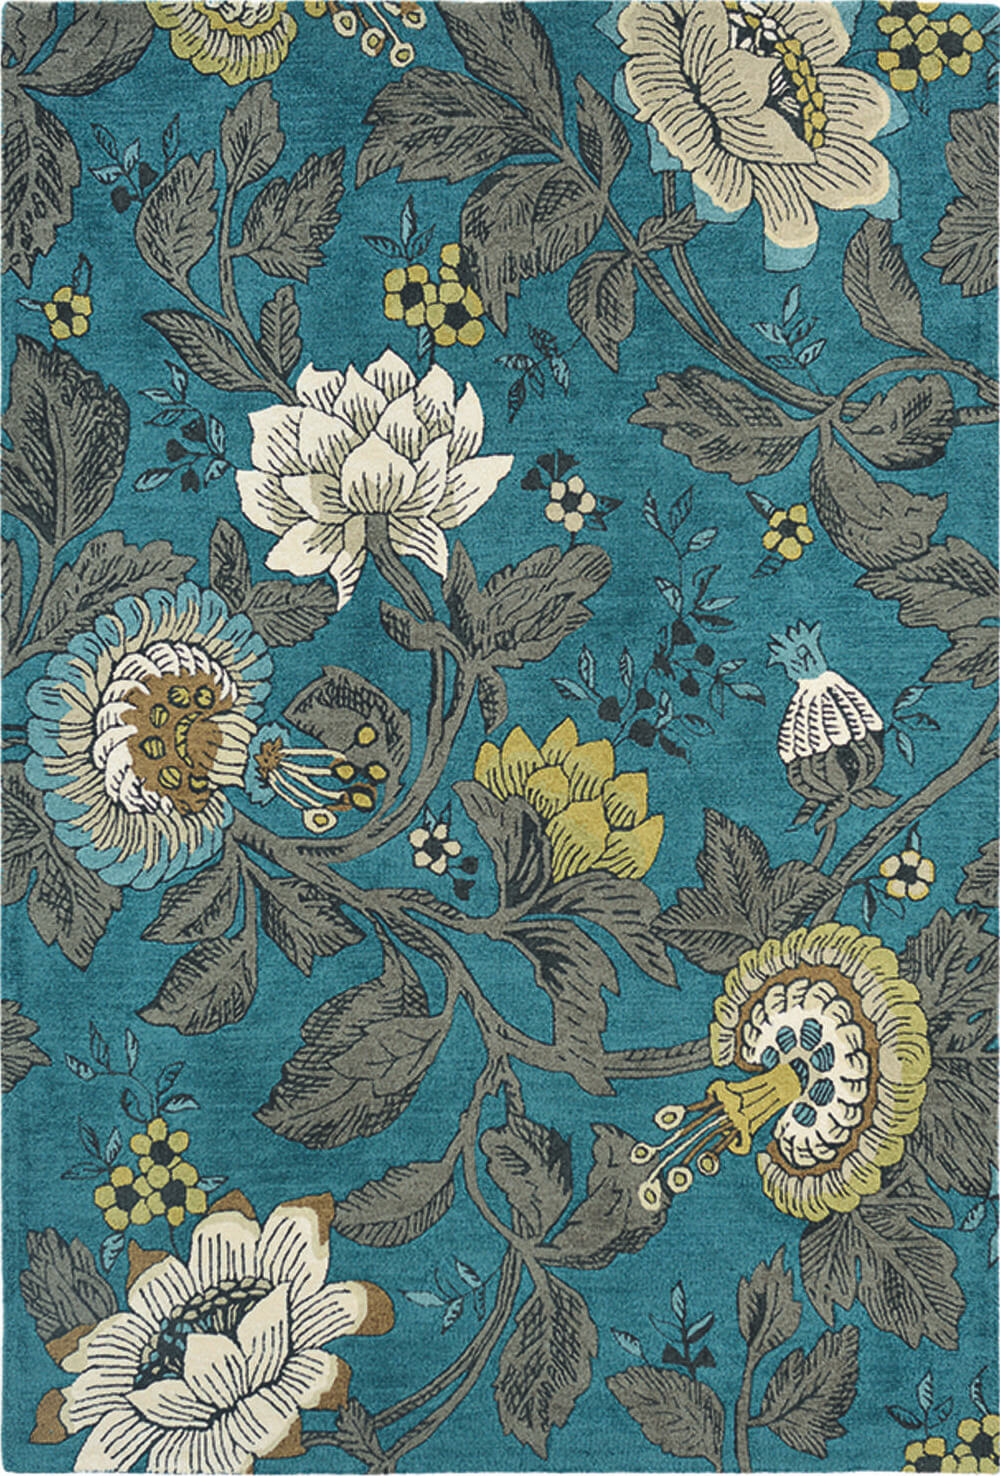 Passion Flower Teal 37117 Rug ☞ Size: 200 x 280 cm